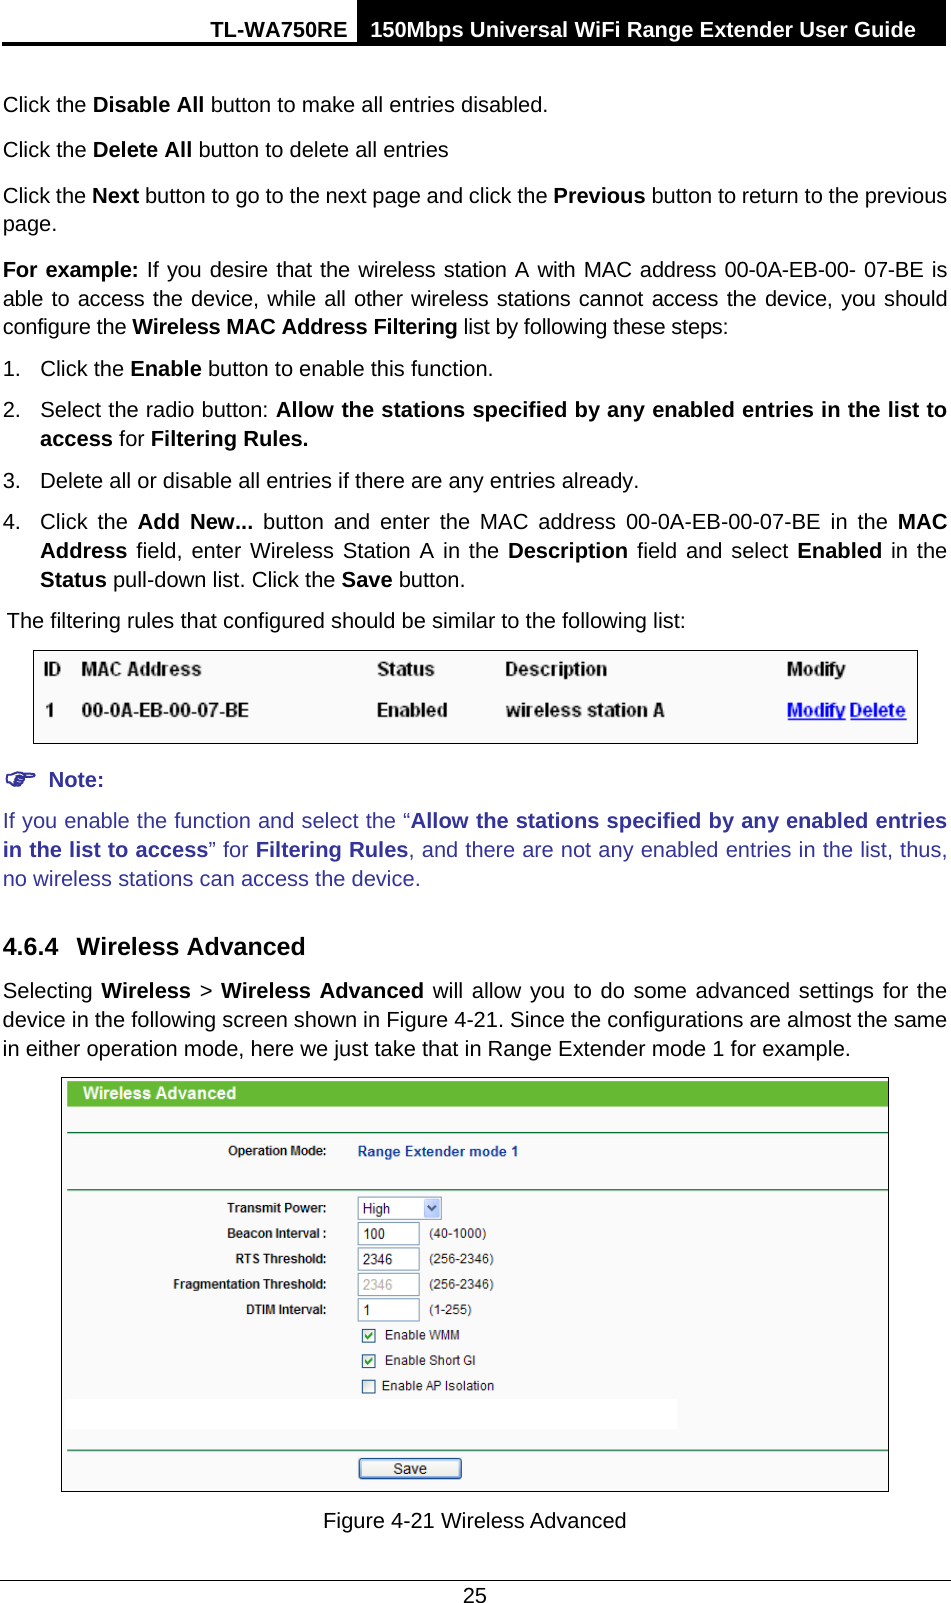 TL-WA750RE 150Mbps Universal WiFi Range Extender User Guide  25 Click the Disable All button to make all entries disabled. Click the Delete All button to delete all entries Click the Next button to go to the next page and click the Previous button to return to the previous page. For example: If you desire that the wireless station A with MAC address 00-0A-EB-00- 07-BE is able to access the device, while all other wireless stations cannot access the device, you should configure the Wireless MAC Address Filtering list by following these steps: 1. Click the Enable button to enable this function. 2. Select the radio button: Allow the stations specified by any enabled entries in the list to access for Filtering Rules. 3. Delete all or disable all entries if there are any entries already. 4. Click the Add New... button and enter the MAC address 00-0A-EB-00-07-BE in the MAC Address field, enter Wireless Station A in the Description field and select Enabled in the Status pull-down list. Click the Save button. The filtering rules that configured should be similar to the following list:     Note: If you enable the function and select the “Allow the stations specified by any enabled entries in the list to access” for Filtering Rules, and there are not any enabled entries in the list, thus, no wireless stations can access the device. 4.6.4 Wireless Advanced Selecting Wireless &gt; Wireless Advanced will allow you to do some advanced settings for the device in the following screen shown in Figure 4-21. Since the configurations are almost the same in either operation mode, here we just take that in Range Extender mode 1 for example.  Figure 4-21 Wireless Advanced 